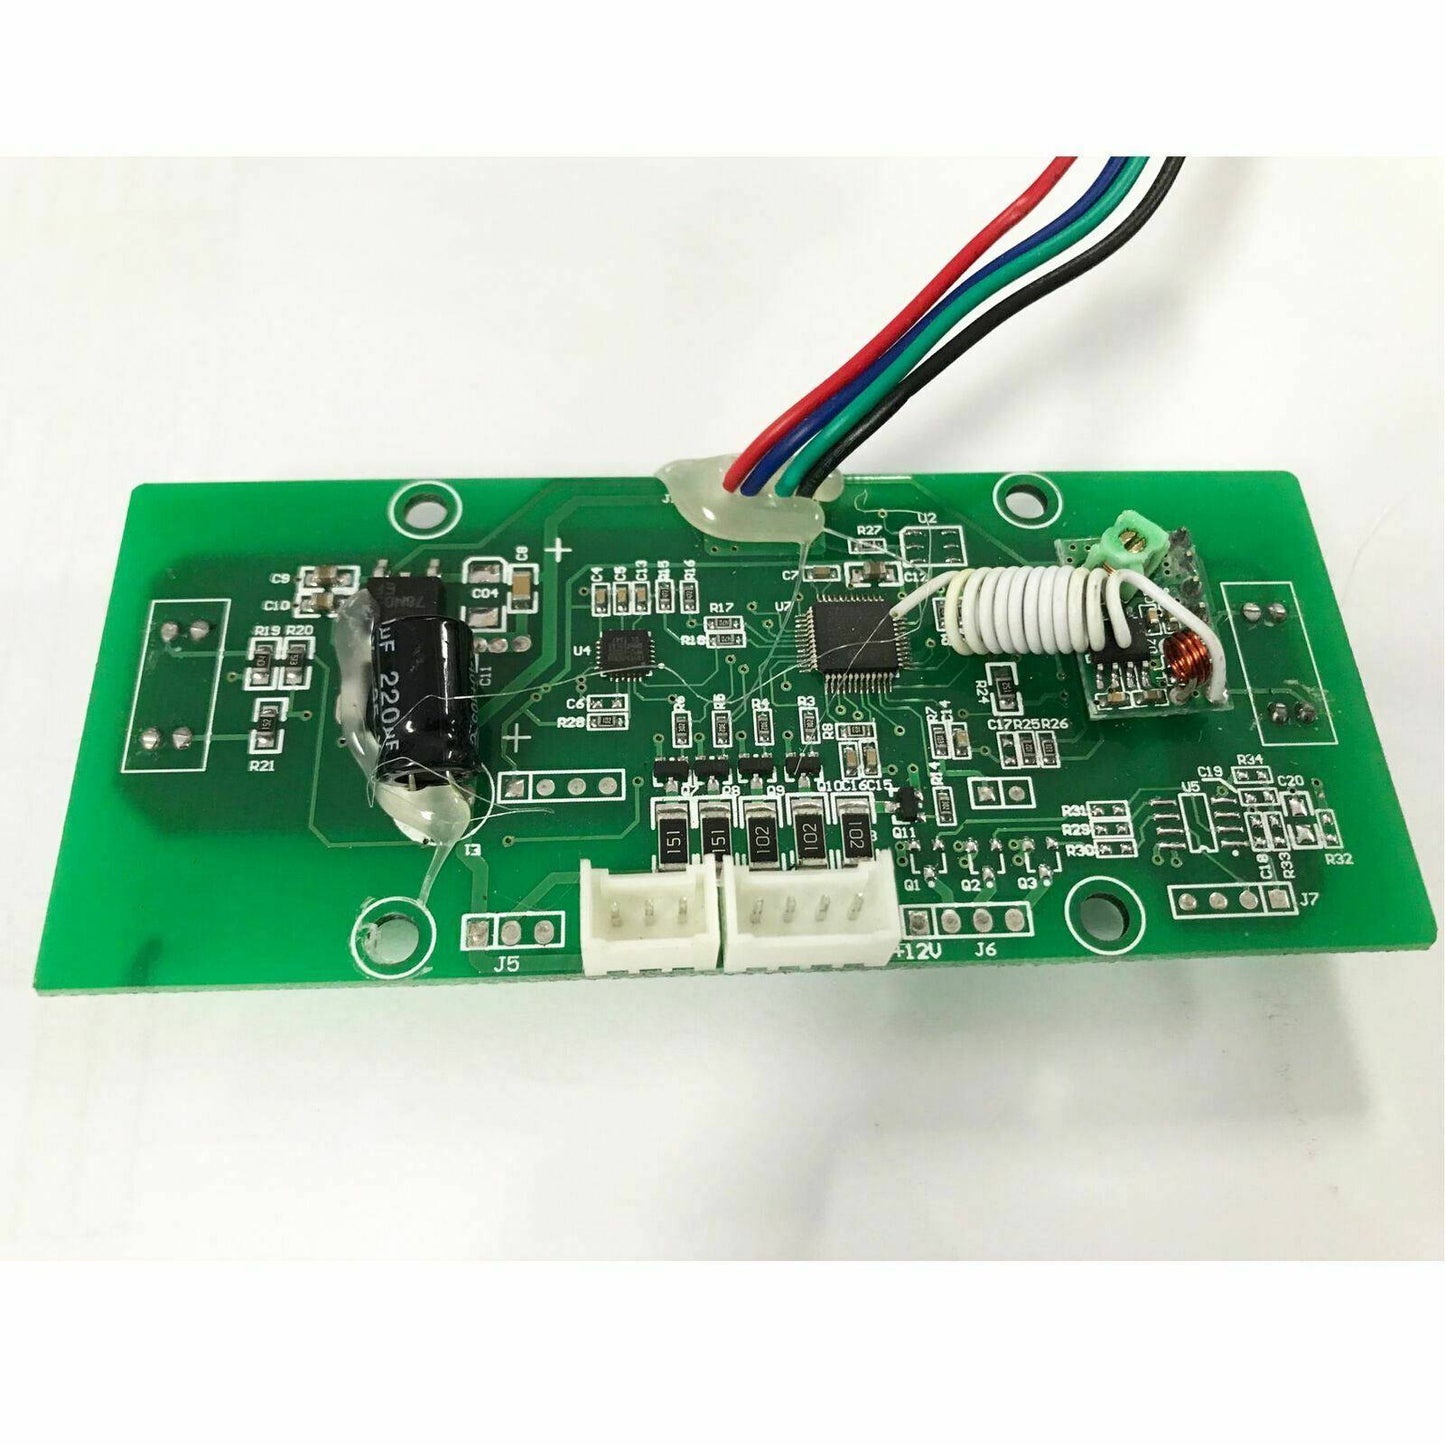 Pair of Intelligent Attitude Control board for Hoverboard Self Balancing Scooter - TDRMOTO